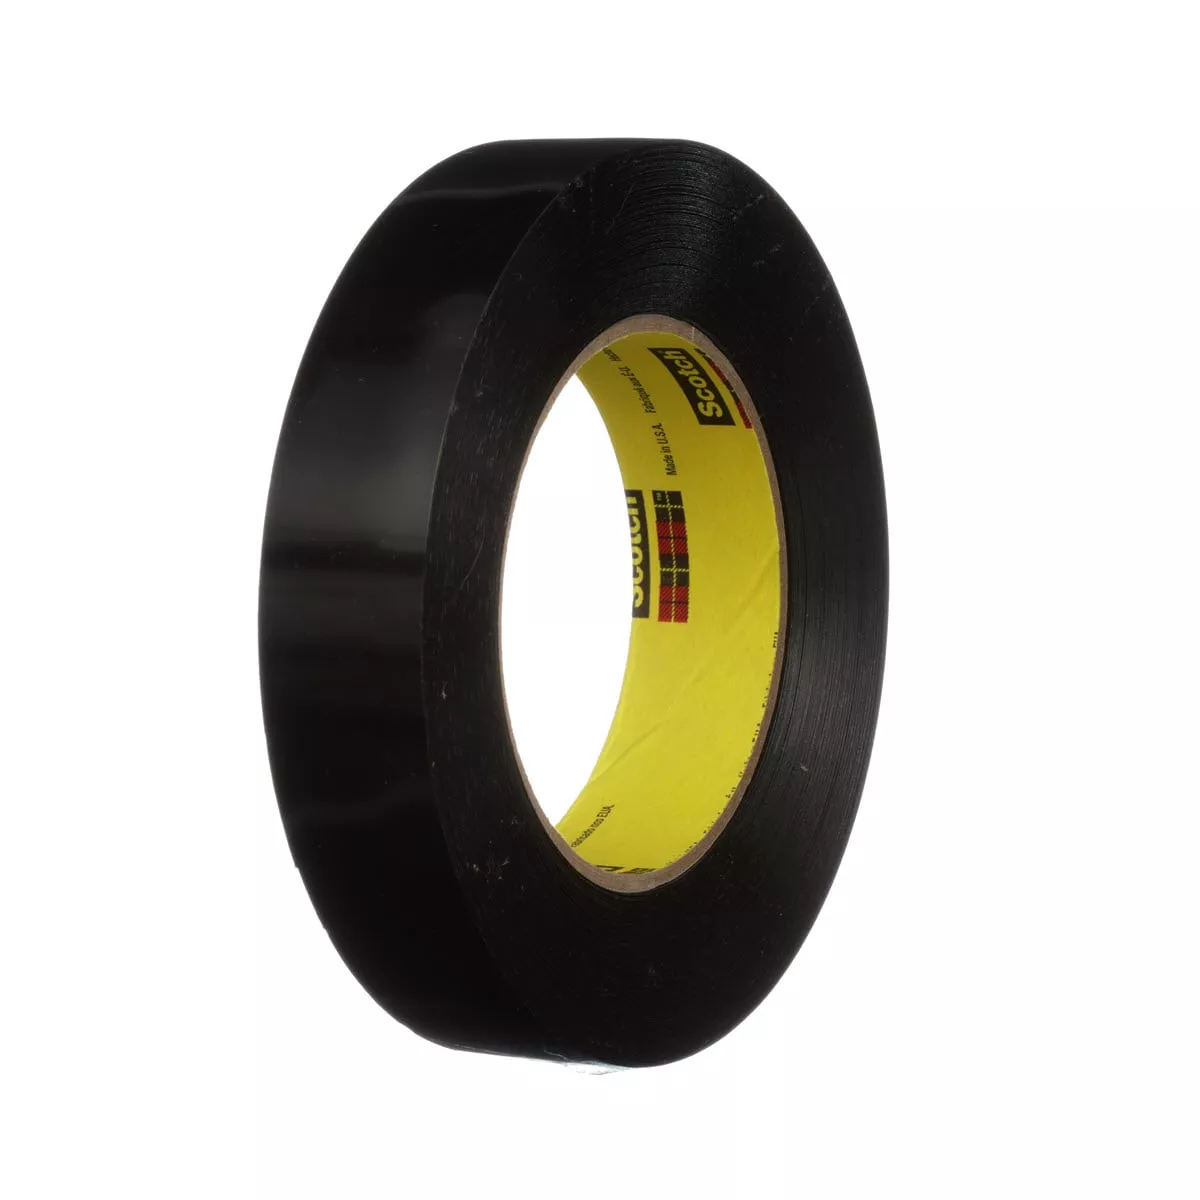 3M™ Preservation Sealing Tape 481, Black, 1/2 in x 36 yd, 9.5 mil, 72
Roll/Case